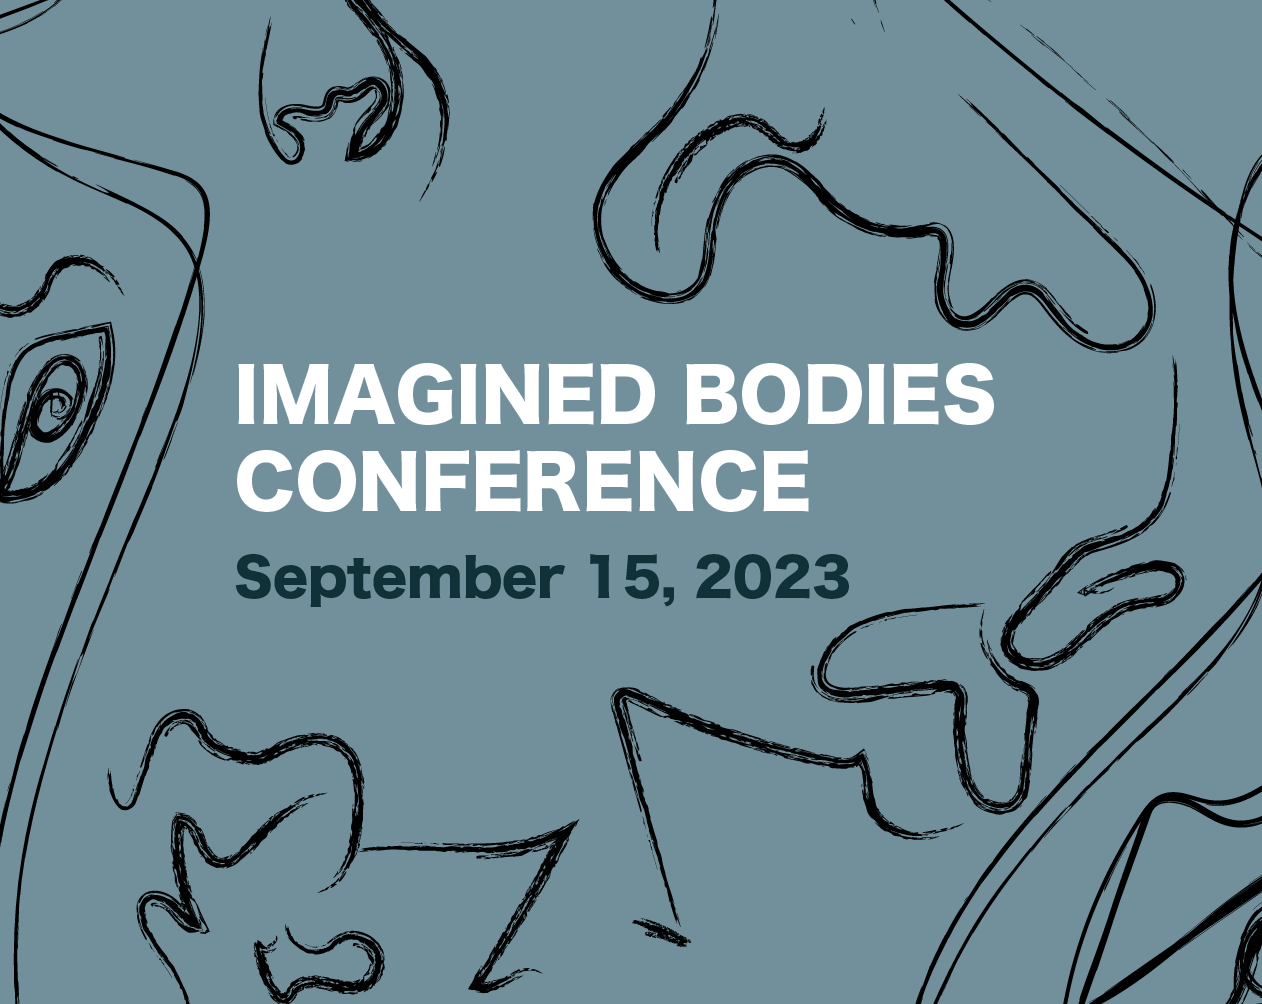 CSLP to Host Imagined Bodies Student Conference on September 15